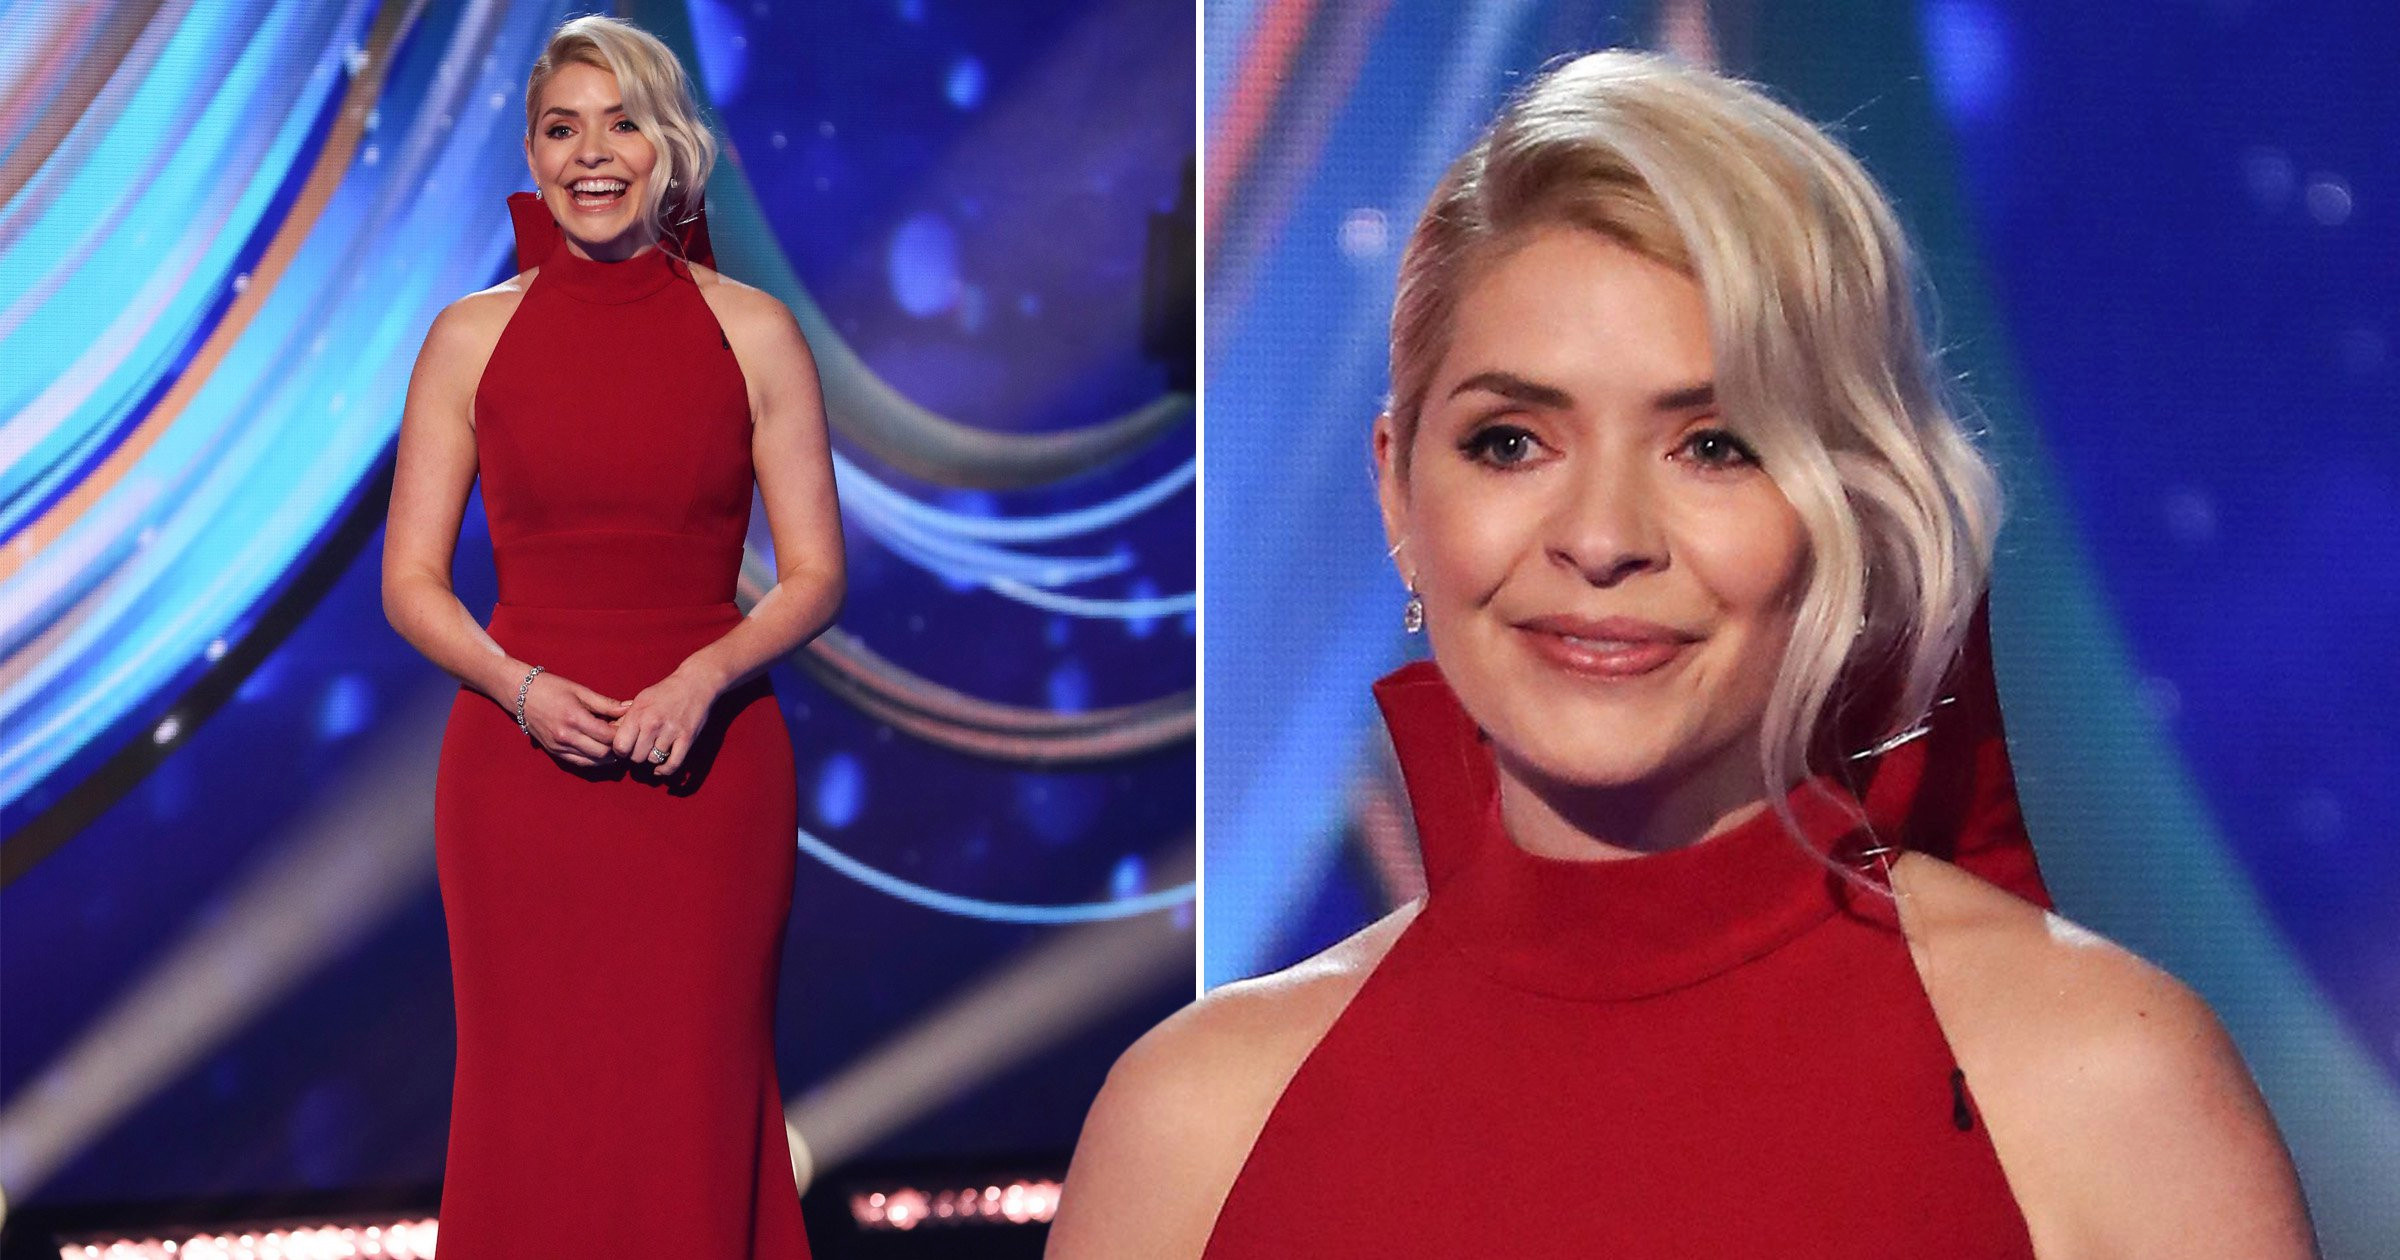 Holly Willoughby fans defend Dancing on Ice dress and urge her to stick it to the haters